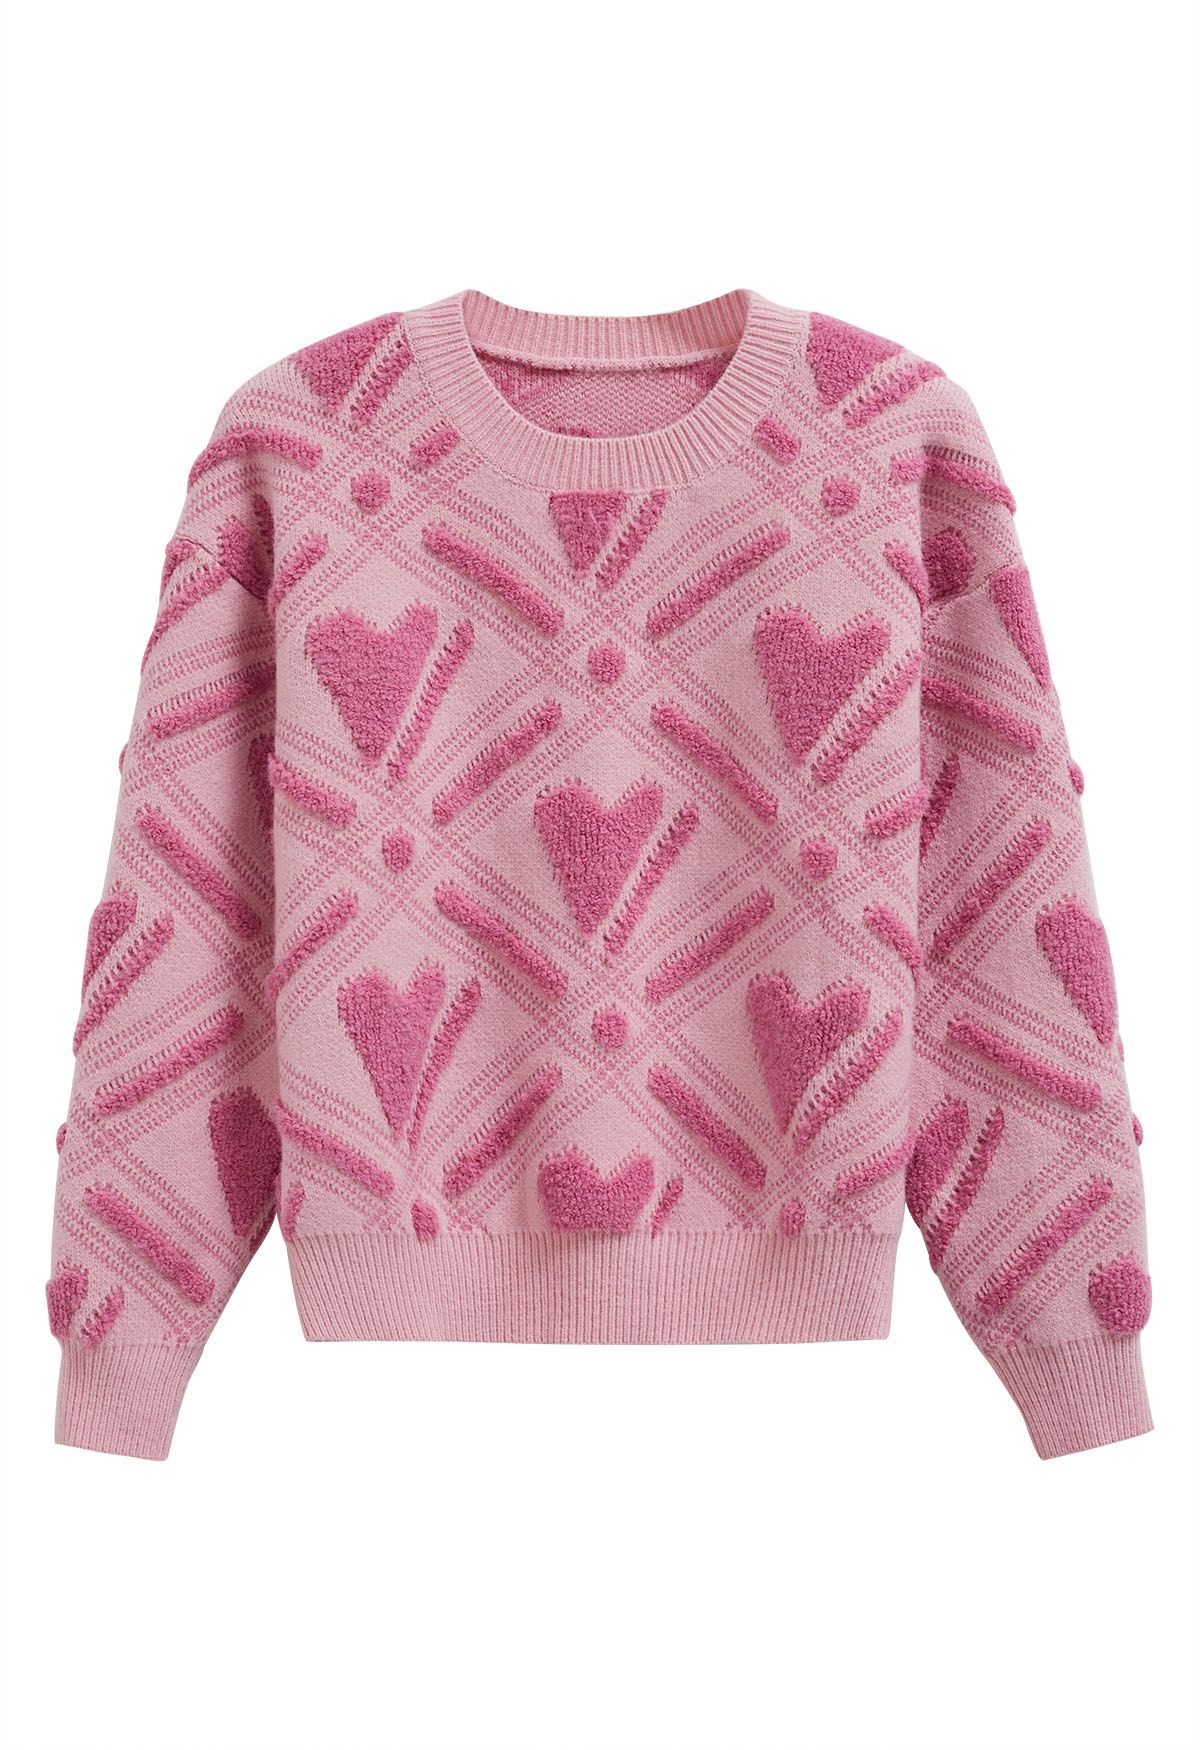 Blushing Love Fuzzy Pink Heart Strickpullover